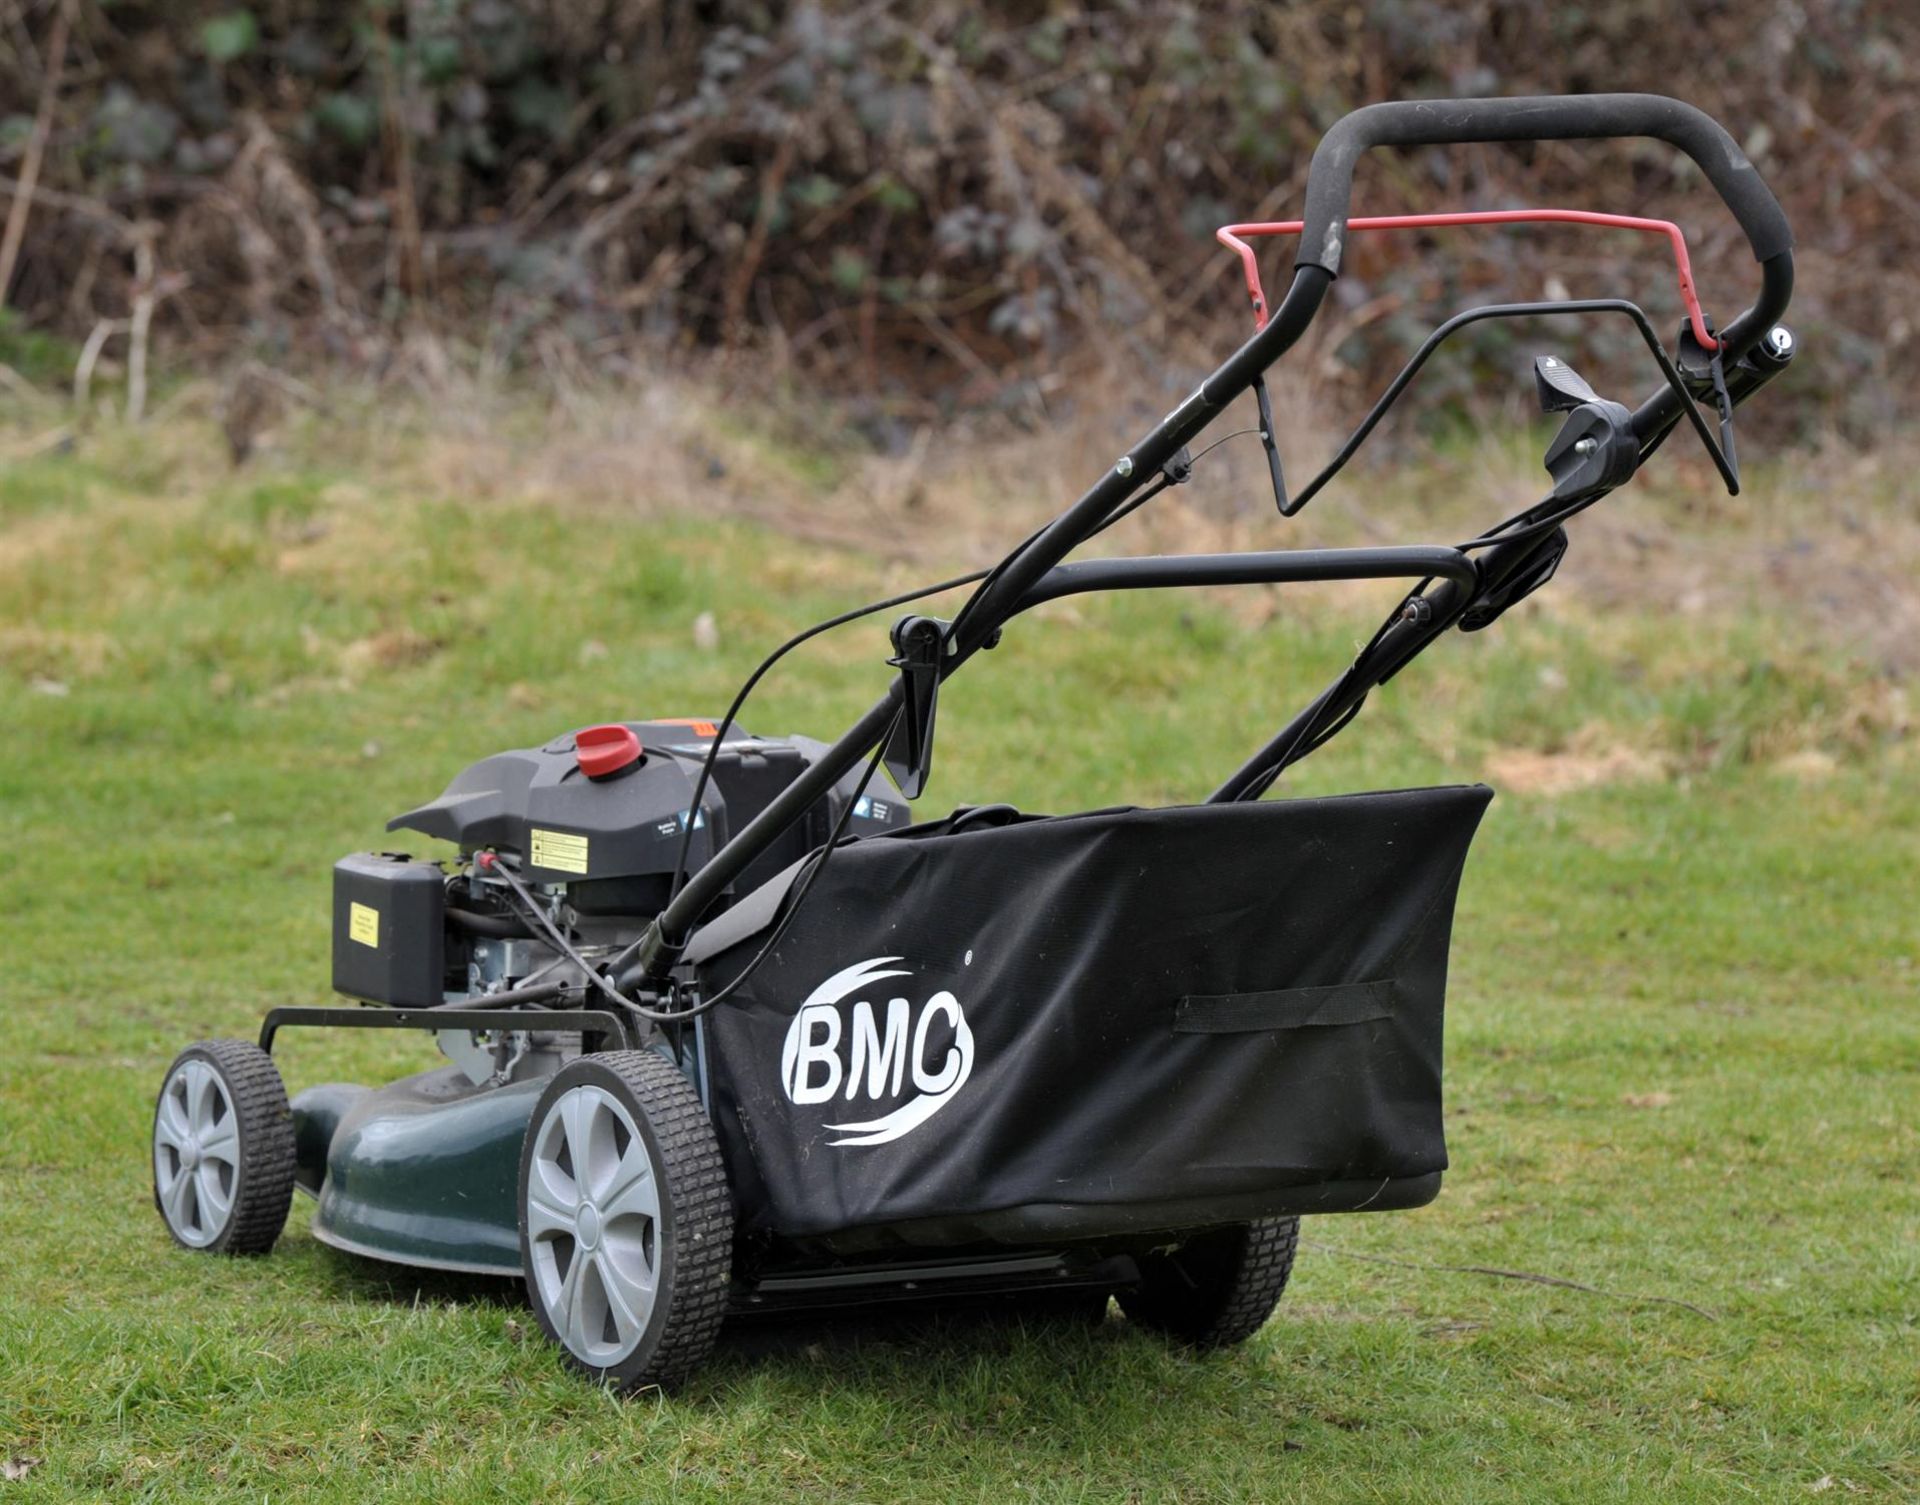 Wolf 5.5 HP Engine, two blade Lawn Racer Mower. PLEASE NOTE BUYERS PREMIUM AT THE STANDARD IN - Image 7 of 9